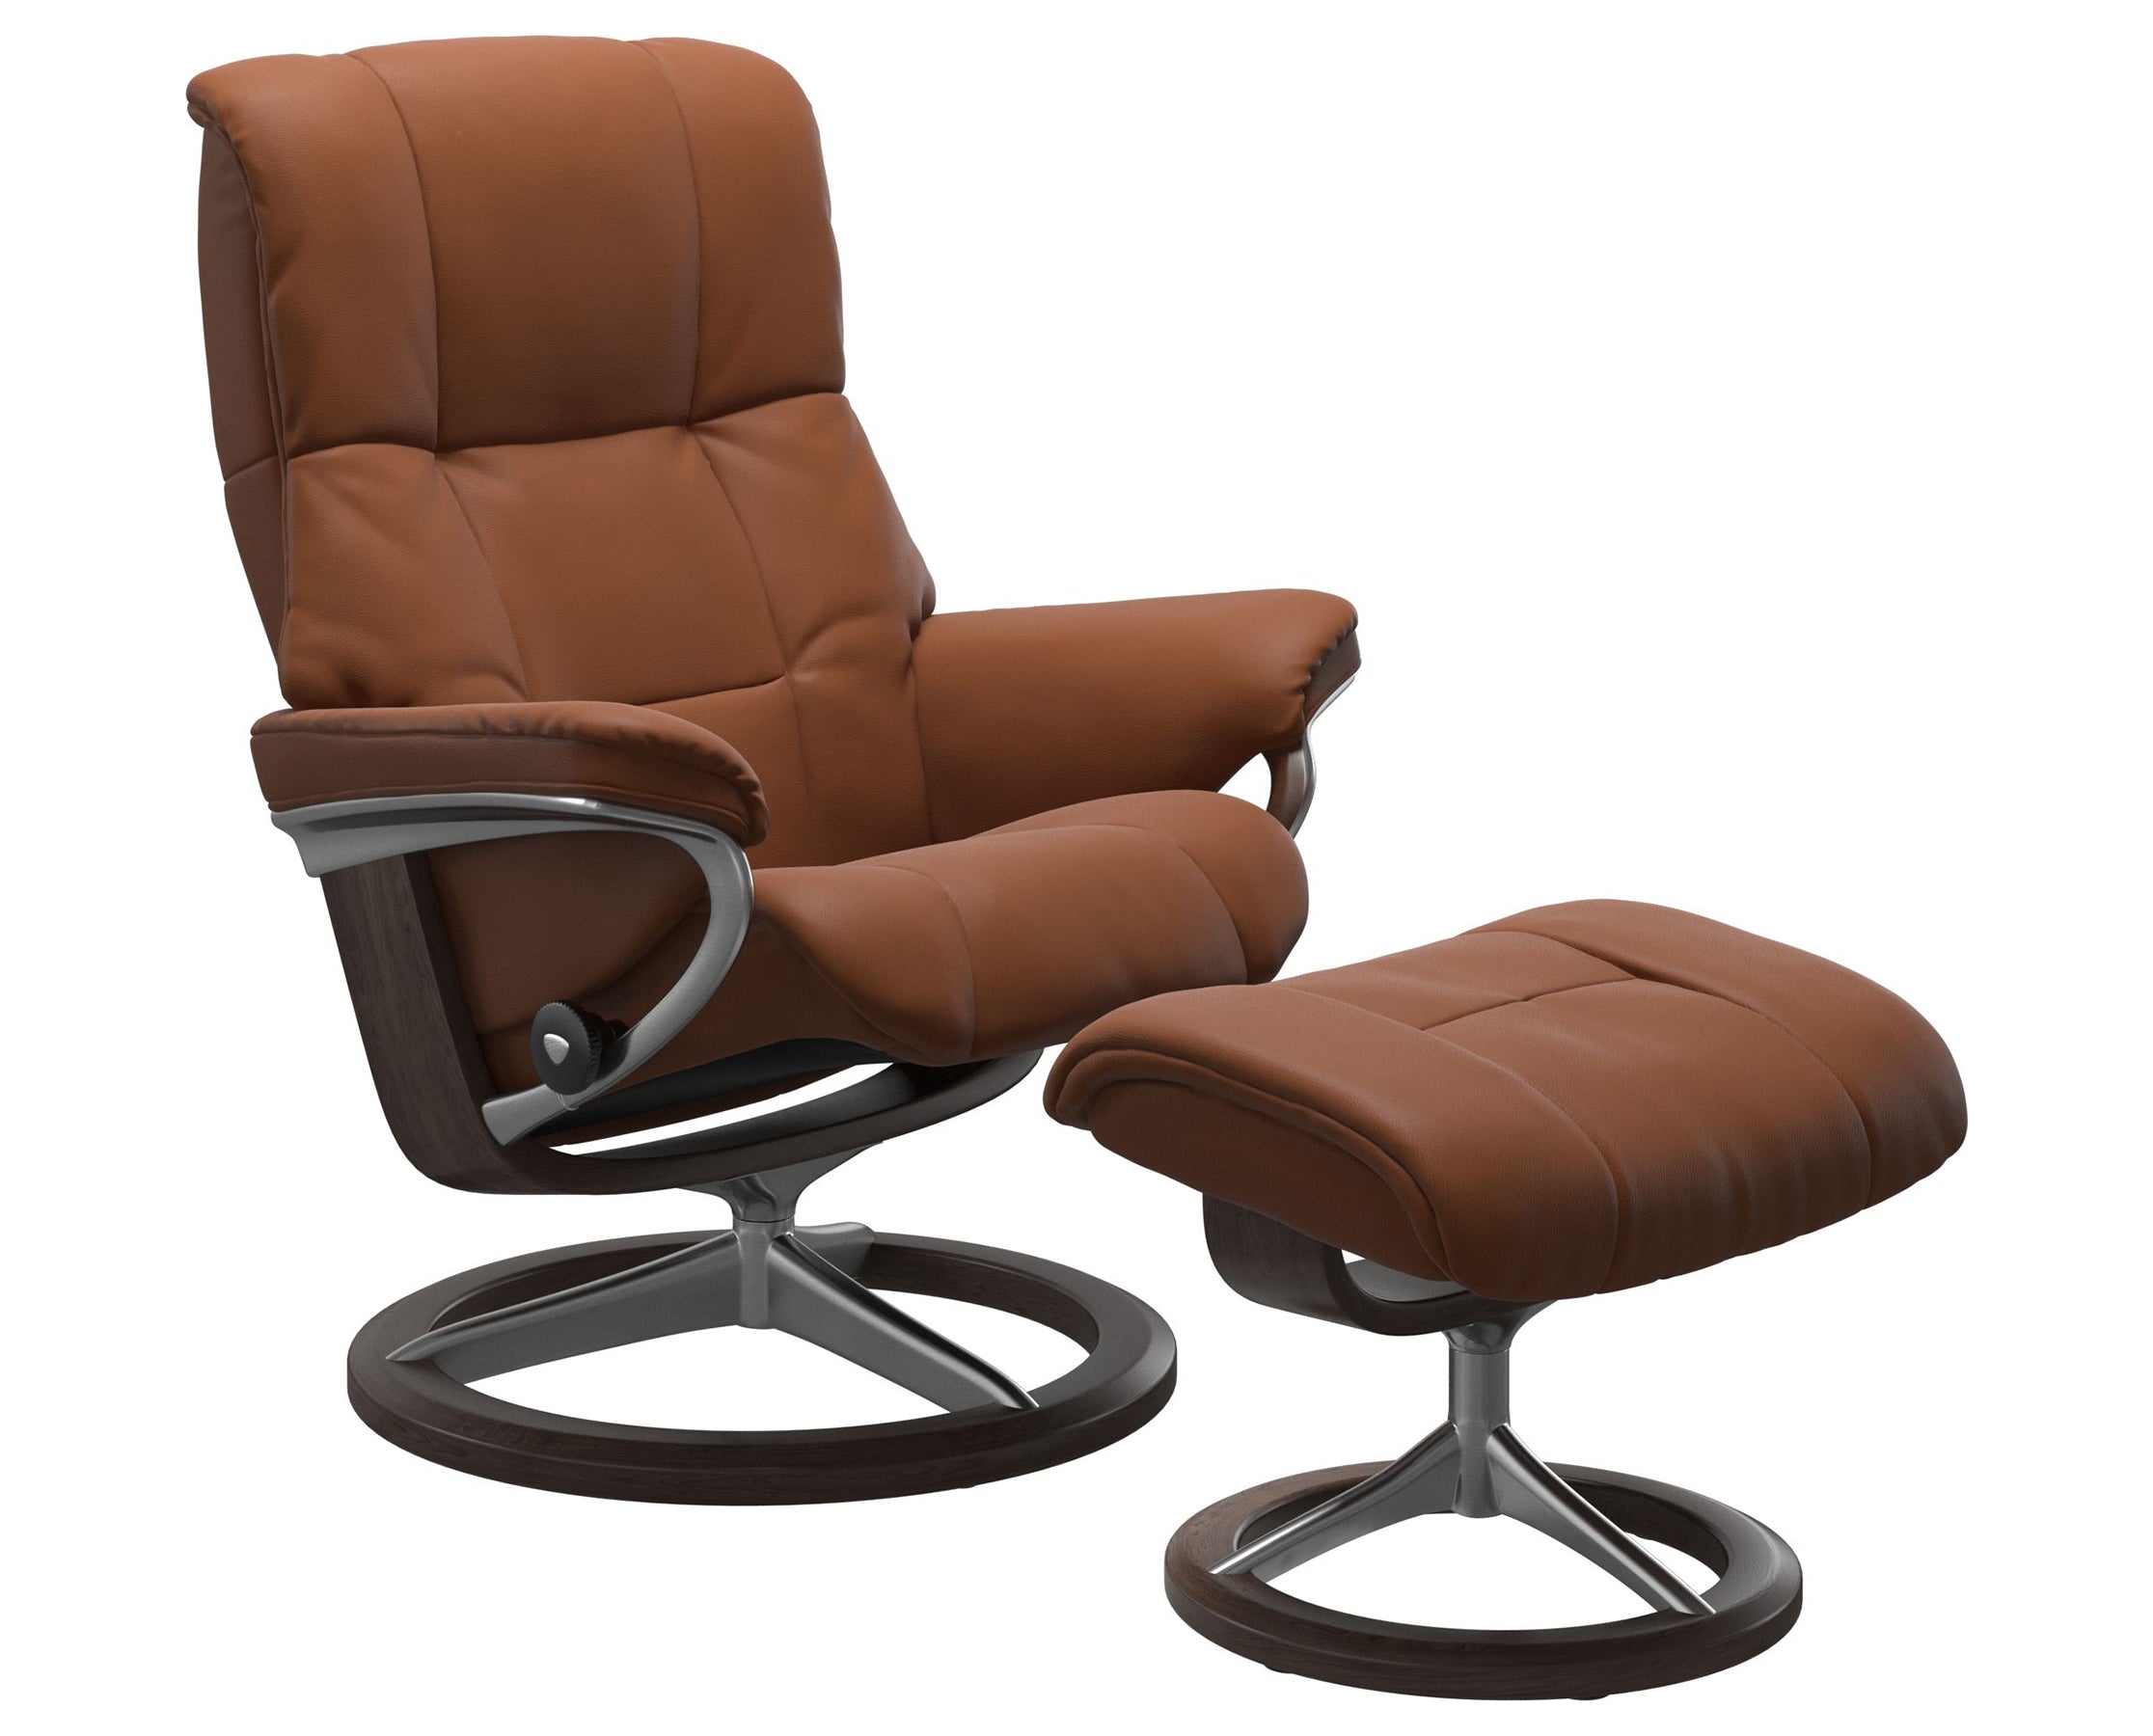 Paloma Leather New Cognac S/M/L and Wenge Base | Stressless Mayfair Signature Recliner | Valley Ridge Furniture